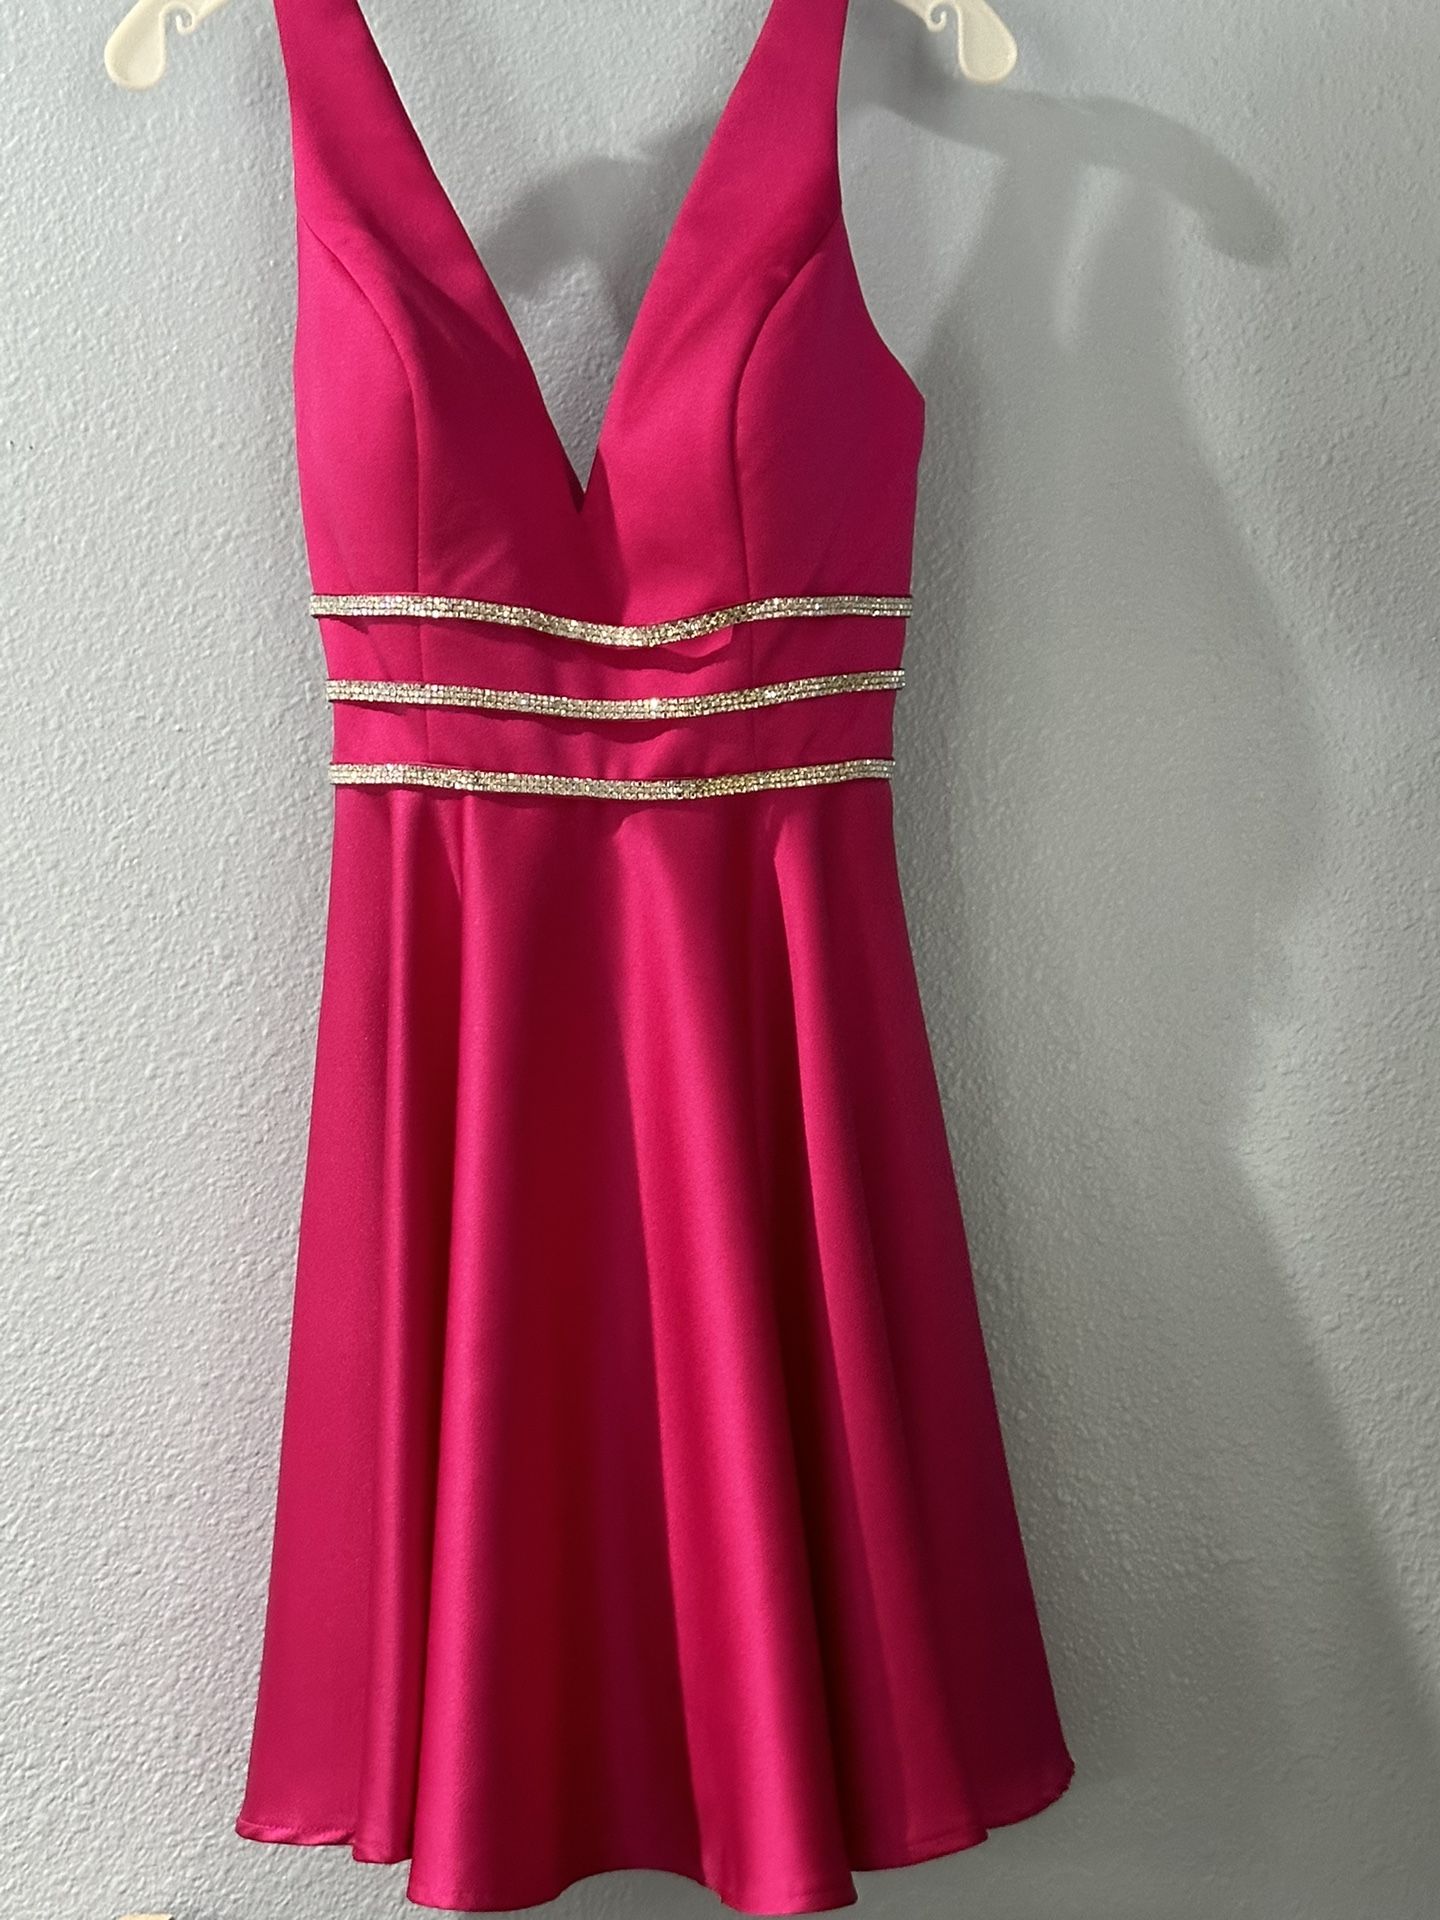 Party Dress - Homecoming/Prom /wedding /